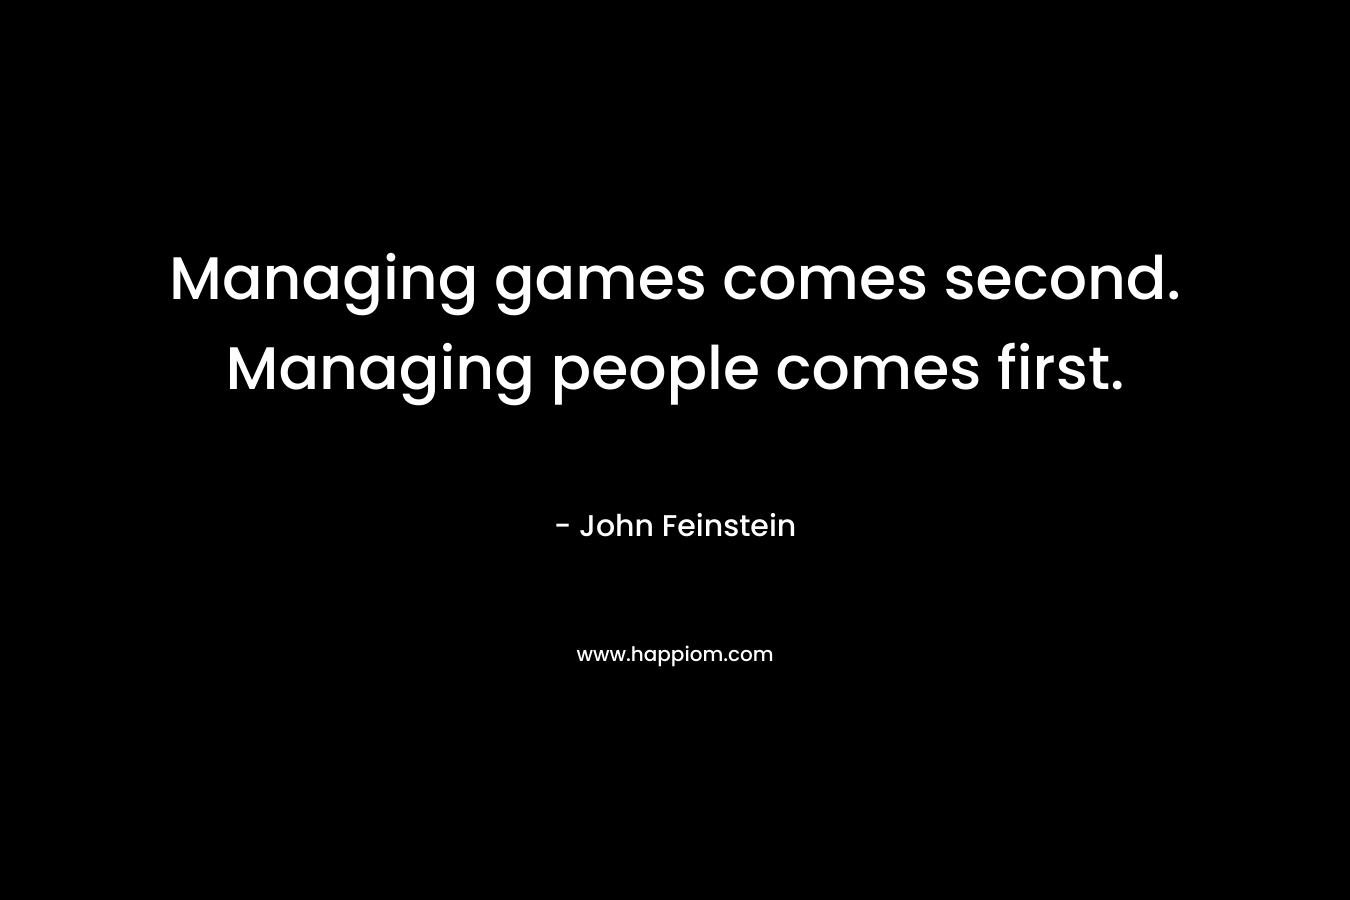 Managing games comes second. Managing people comes first.